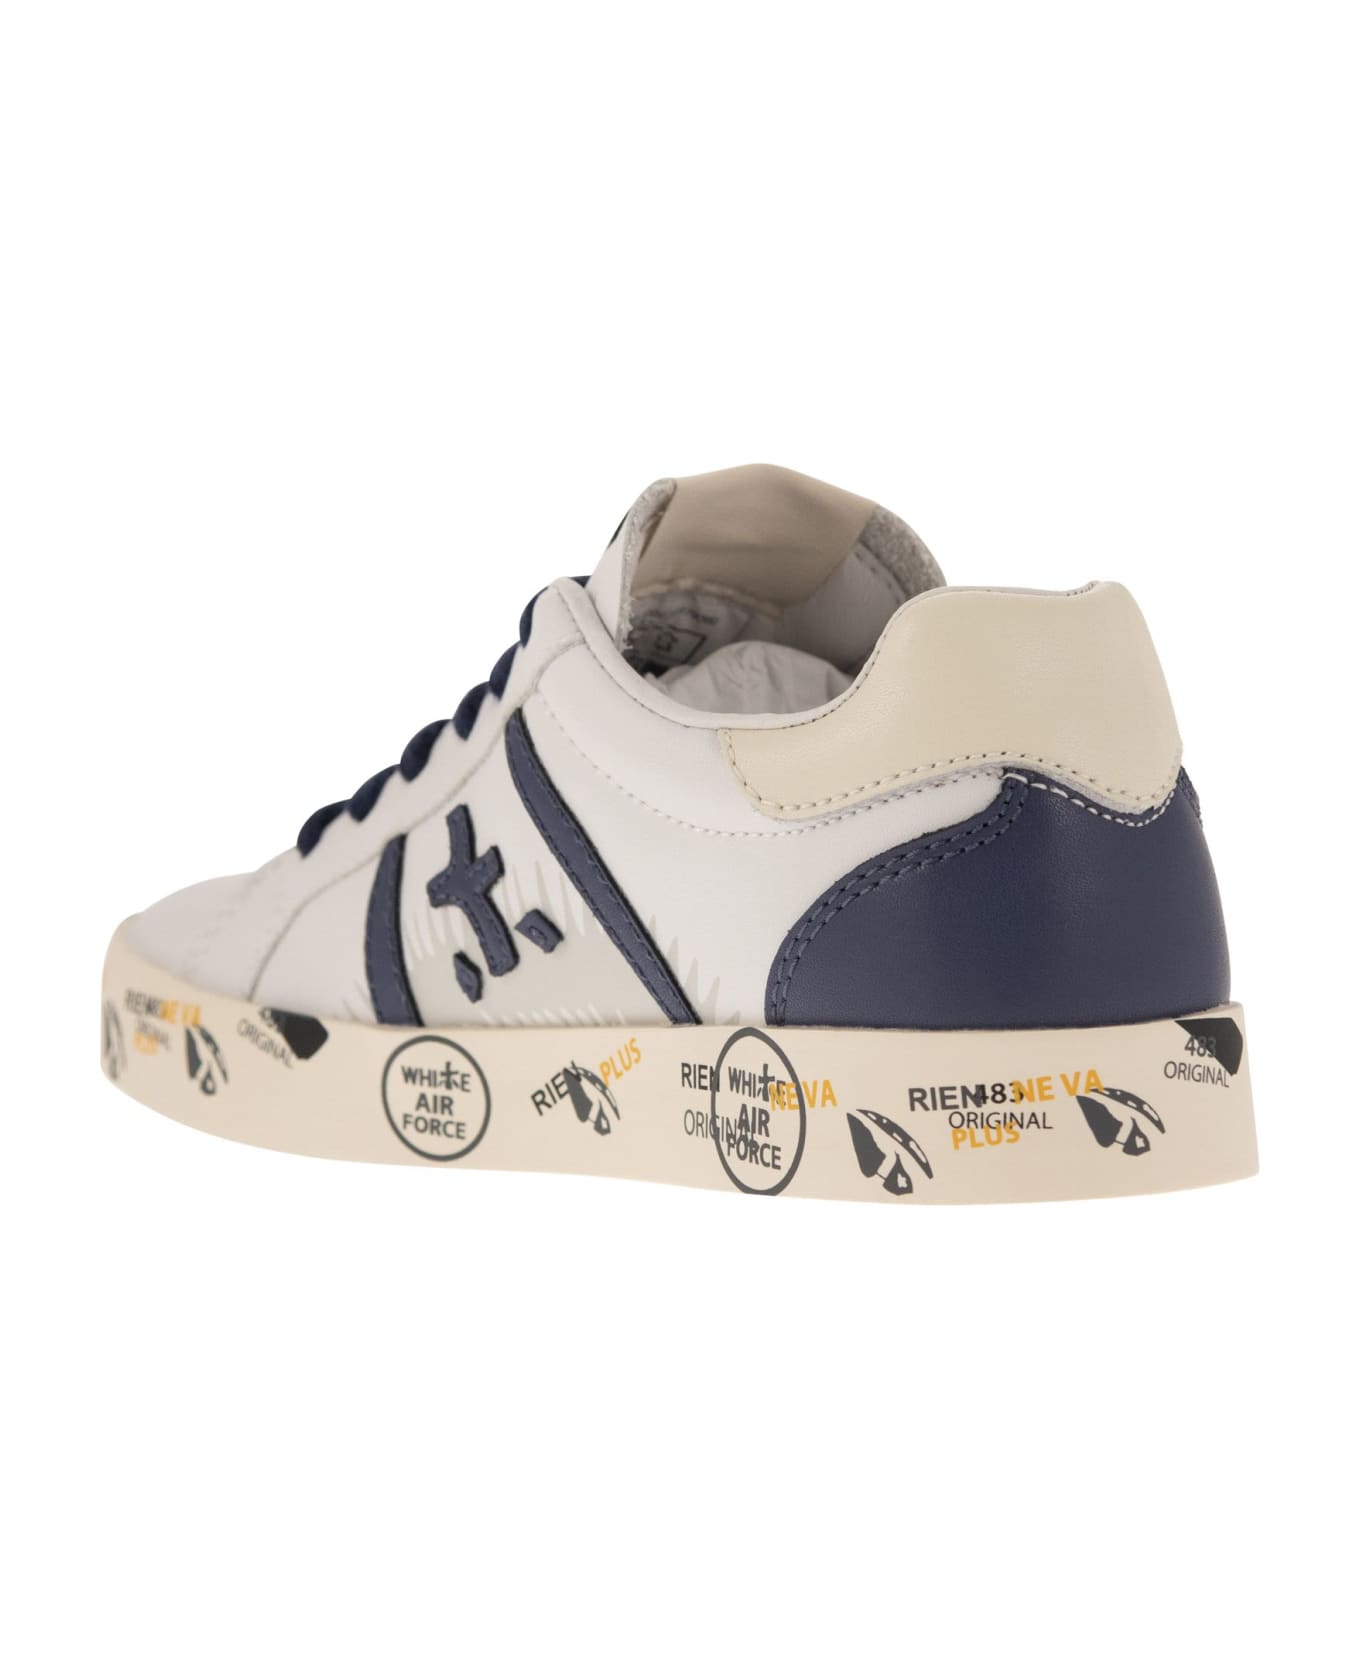 Premiata Andy - Leather Sneakers - White/blue